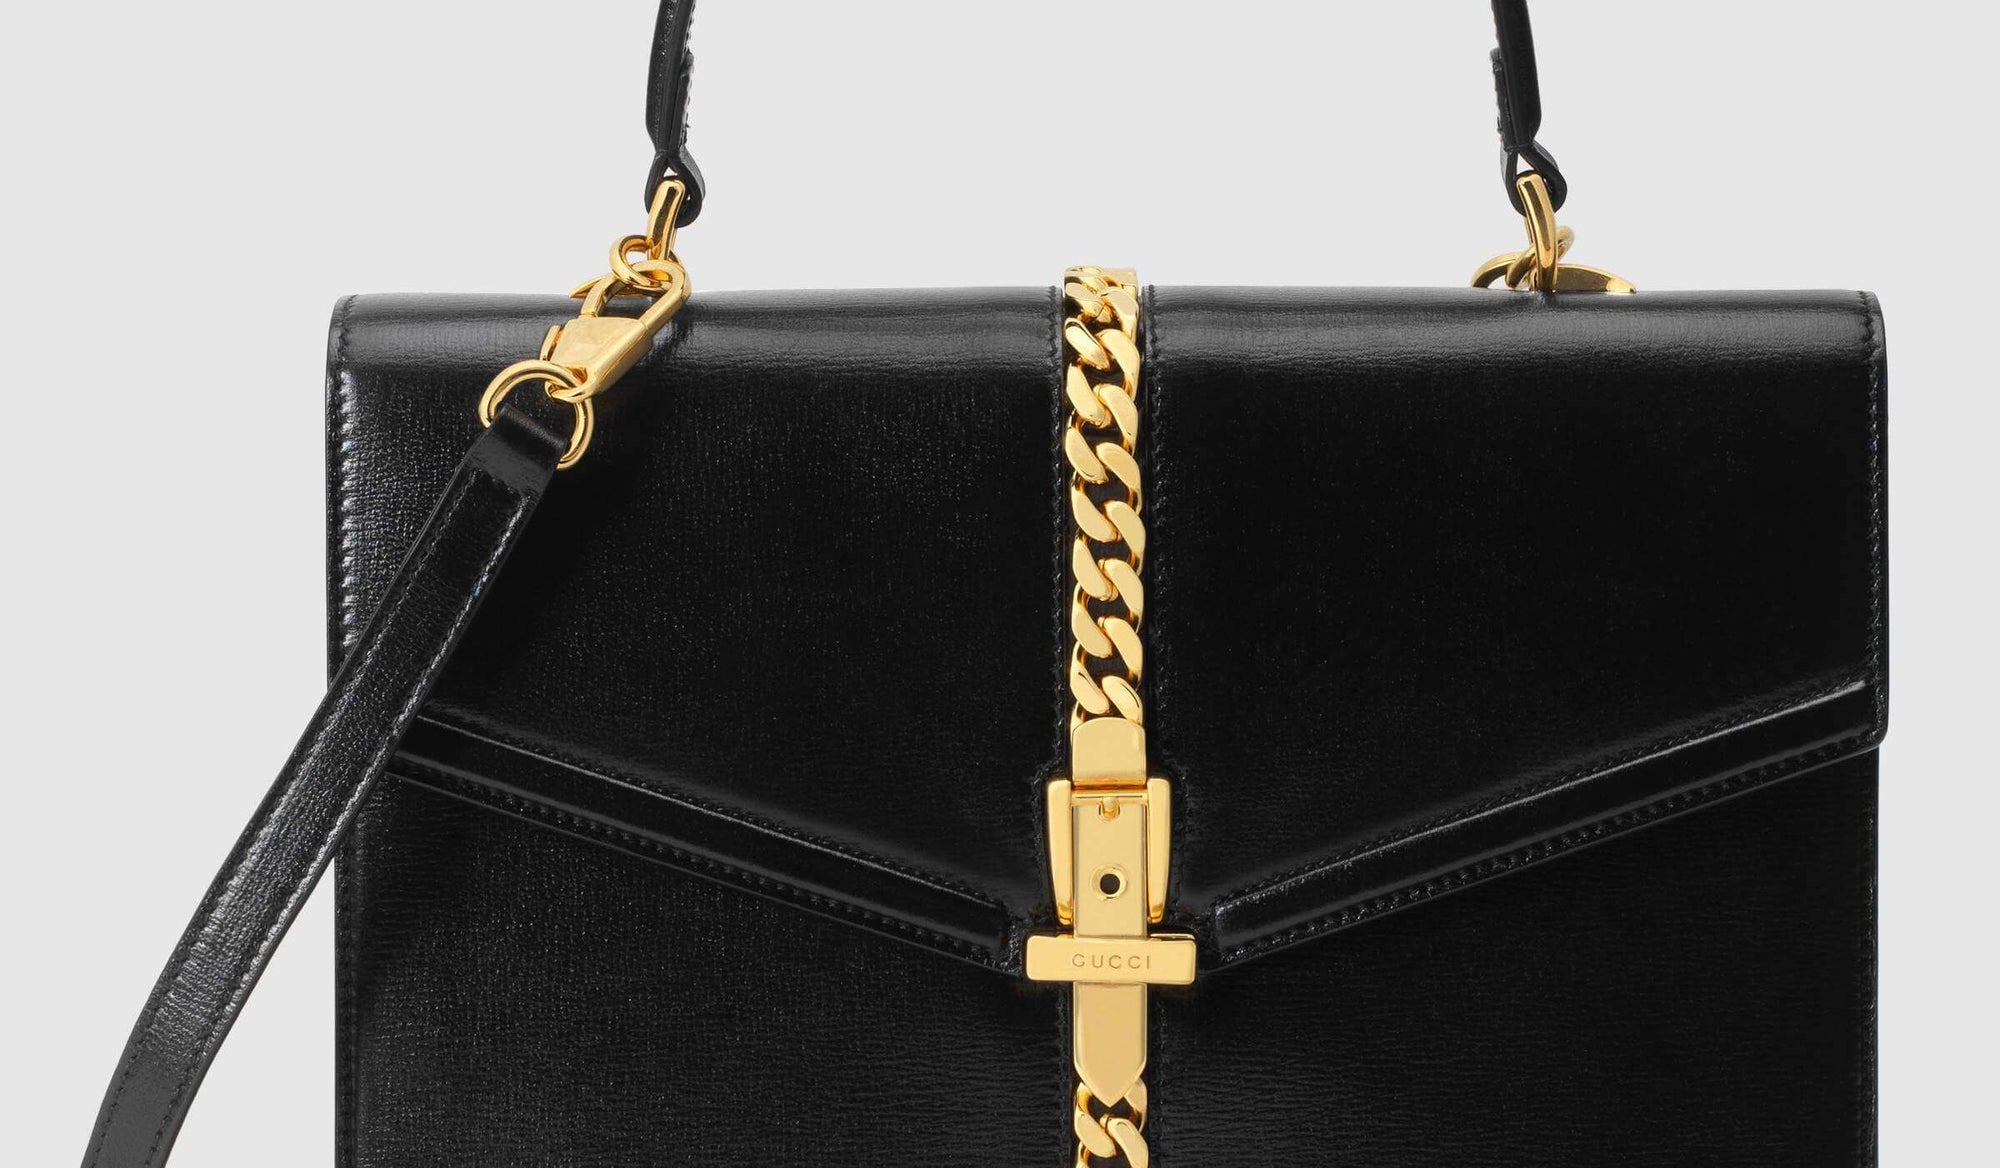 Vegan Leather Bags for the Office and Beyond